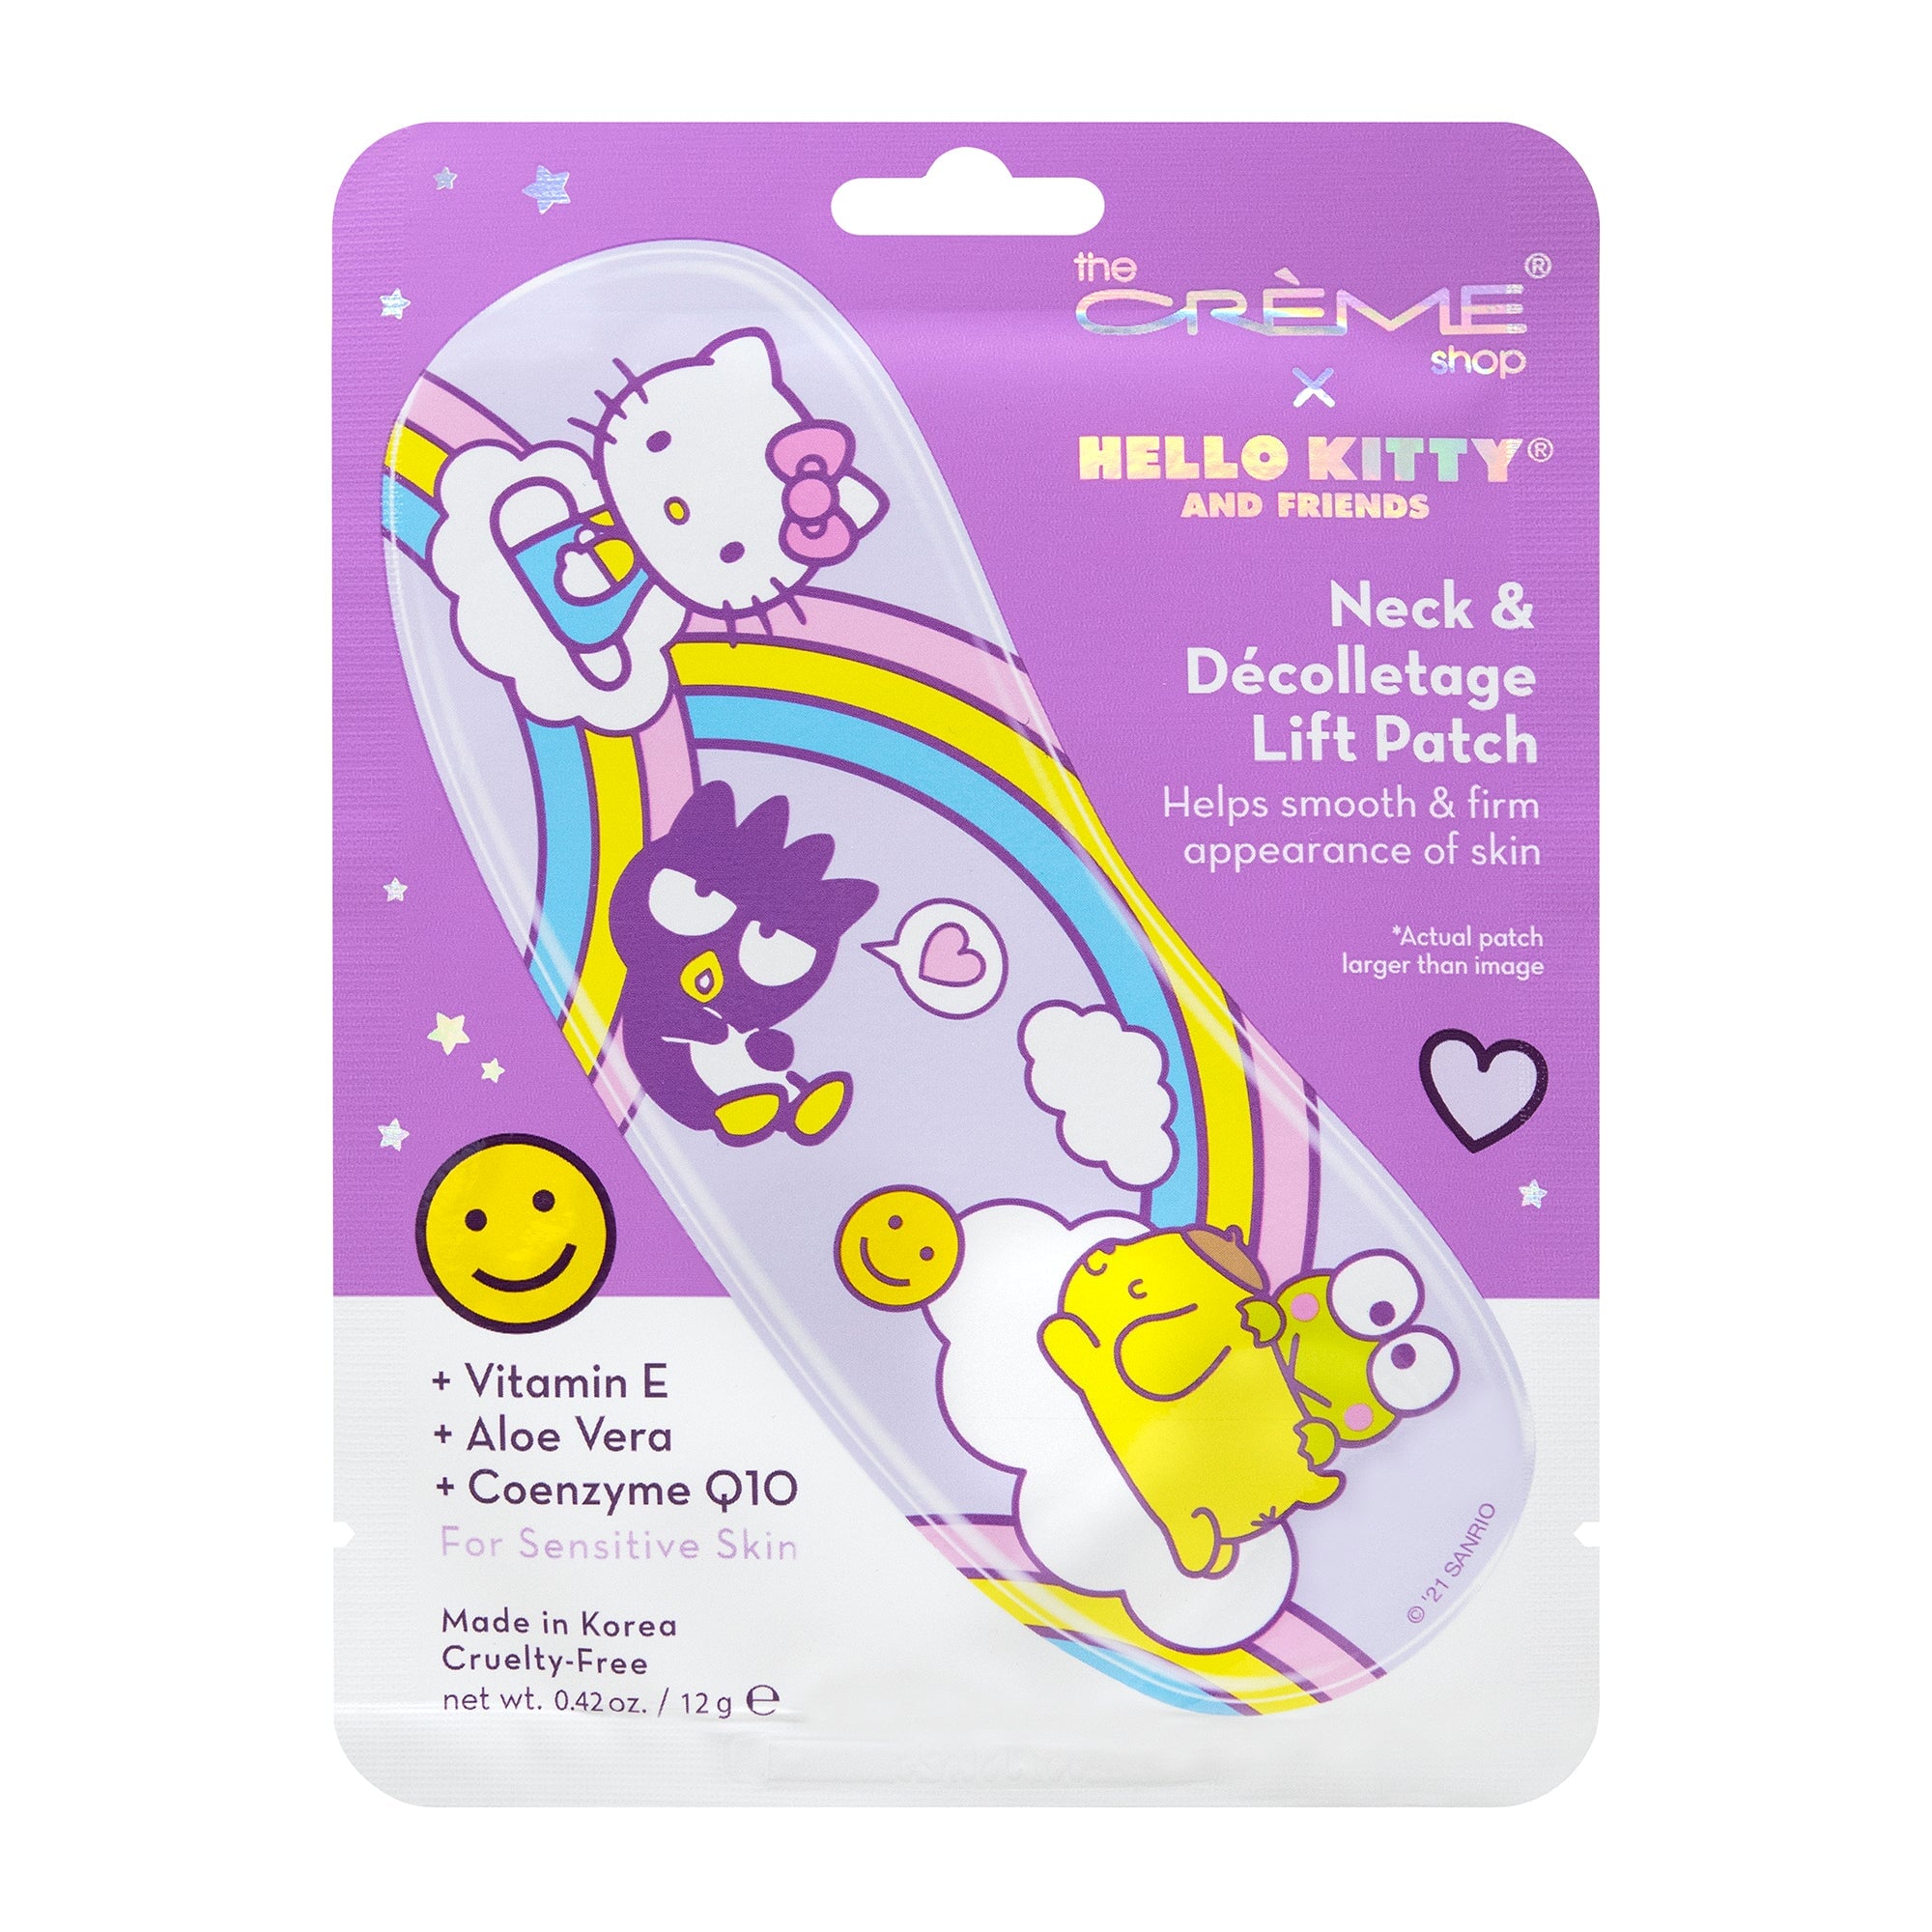 Hello Kitty and Friends Neck & Décolletage Lift Patch Neck Lift Patches The Crème Shop x Sanrio 